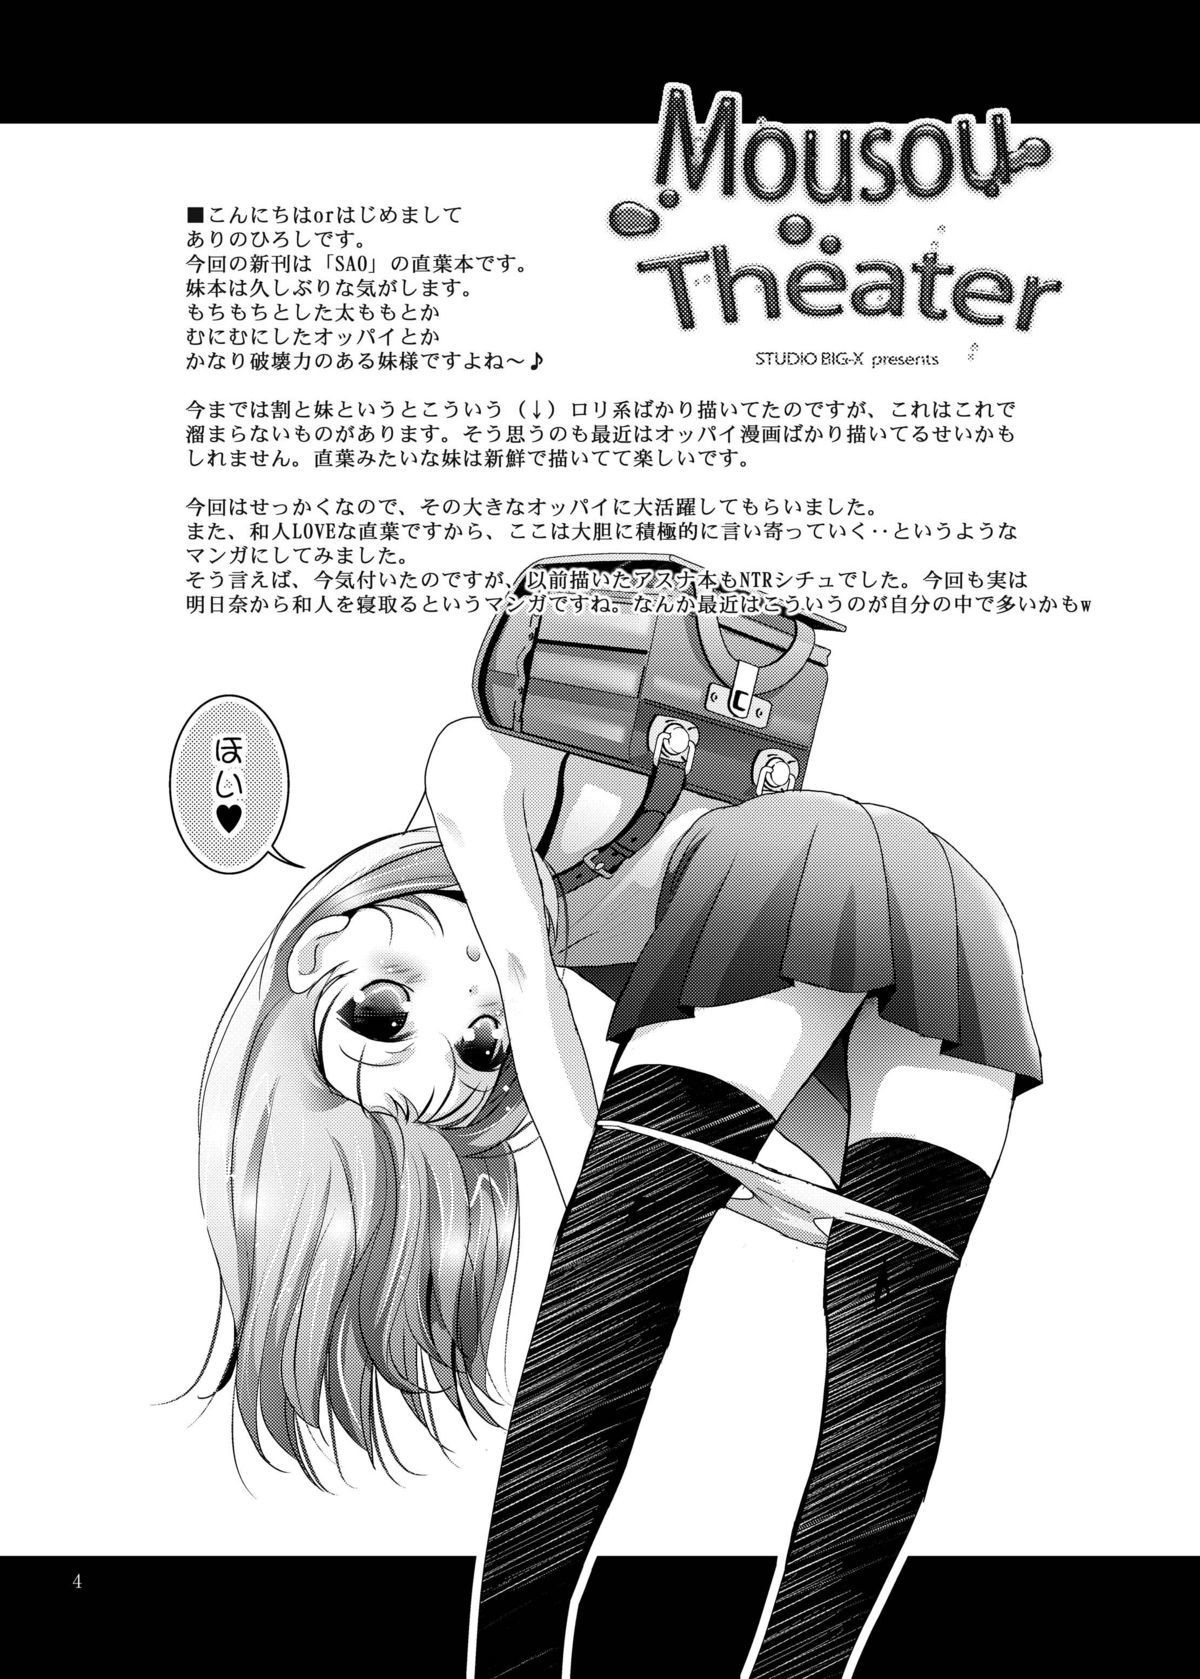 Mousou Theater 38 04